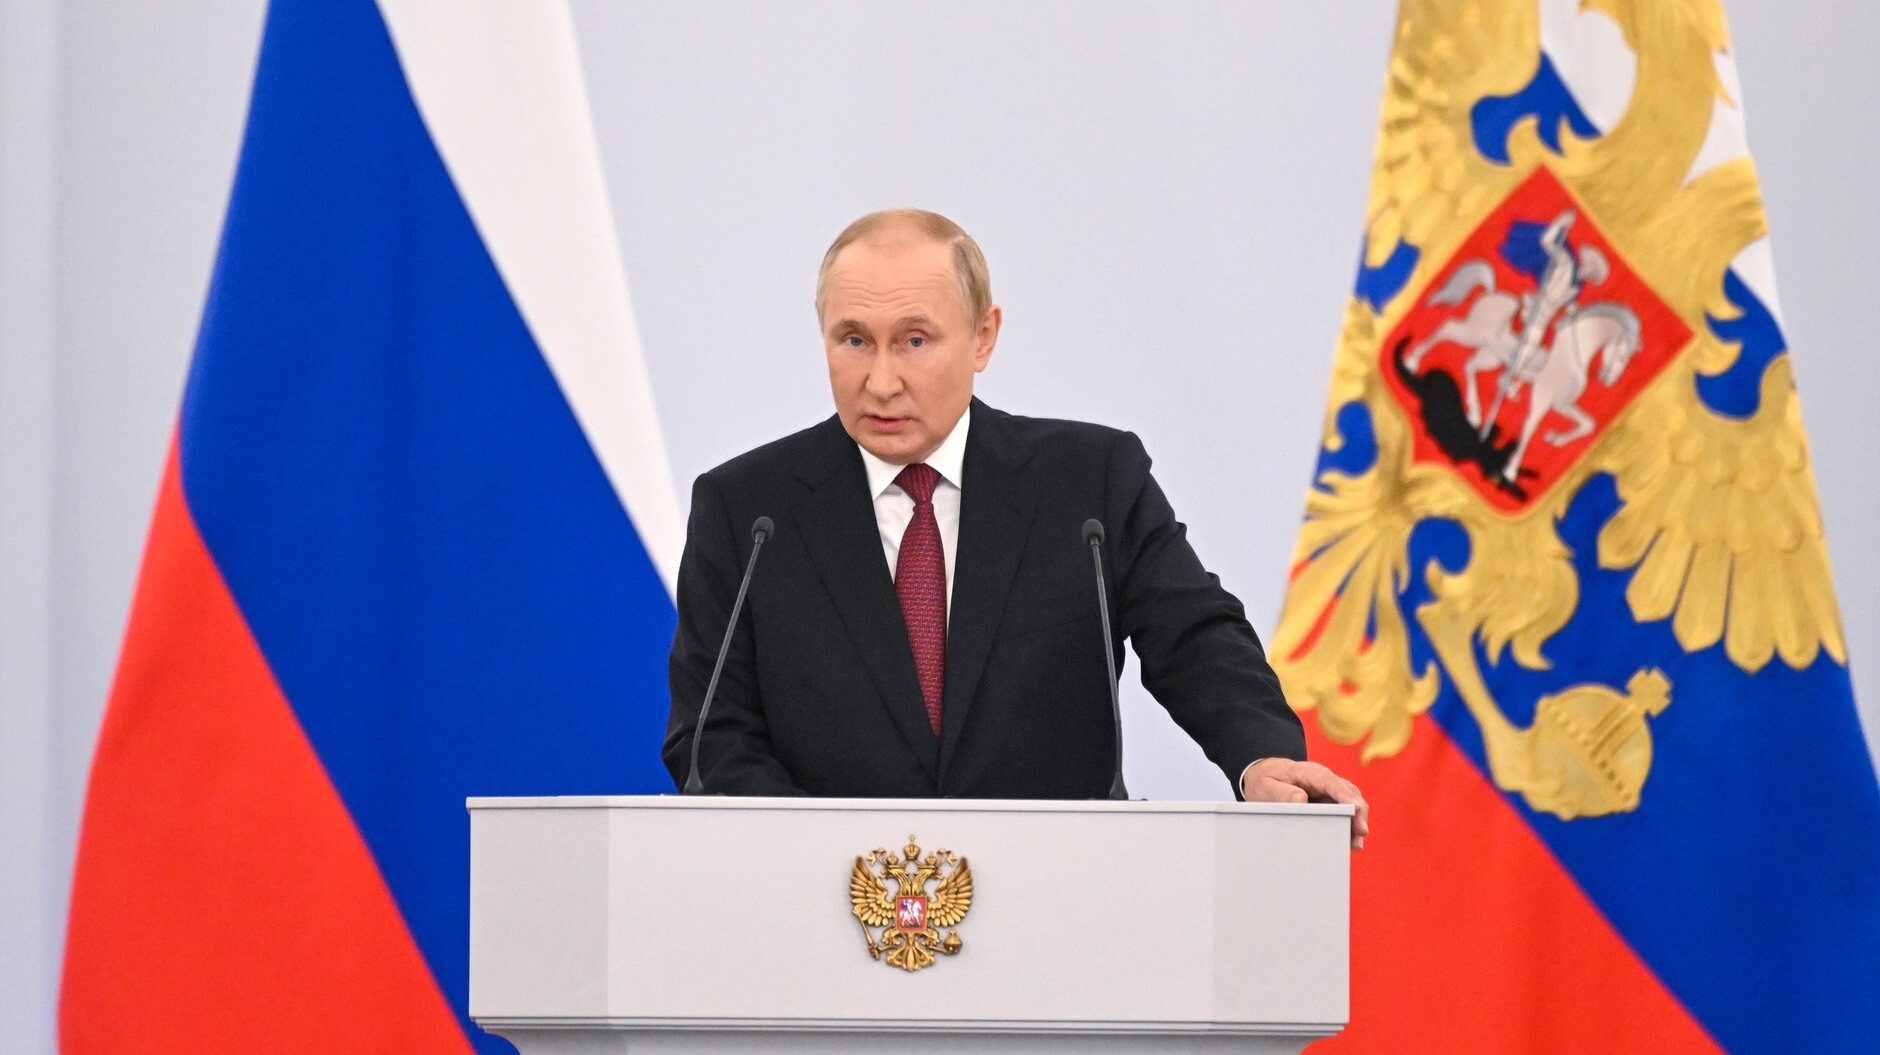 Putin launches ceremony for &#039;accession&#039; of Ukraineâs 4 regions to Russia